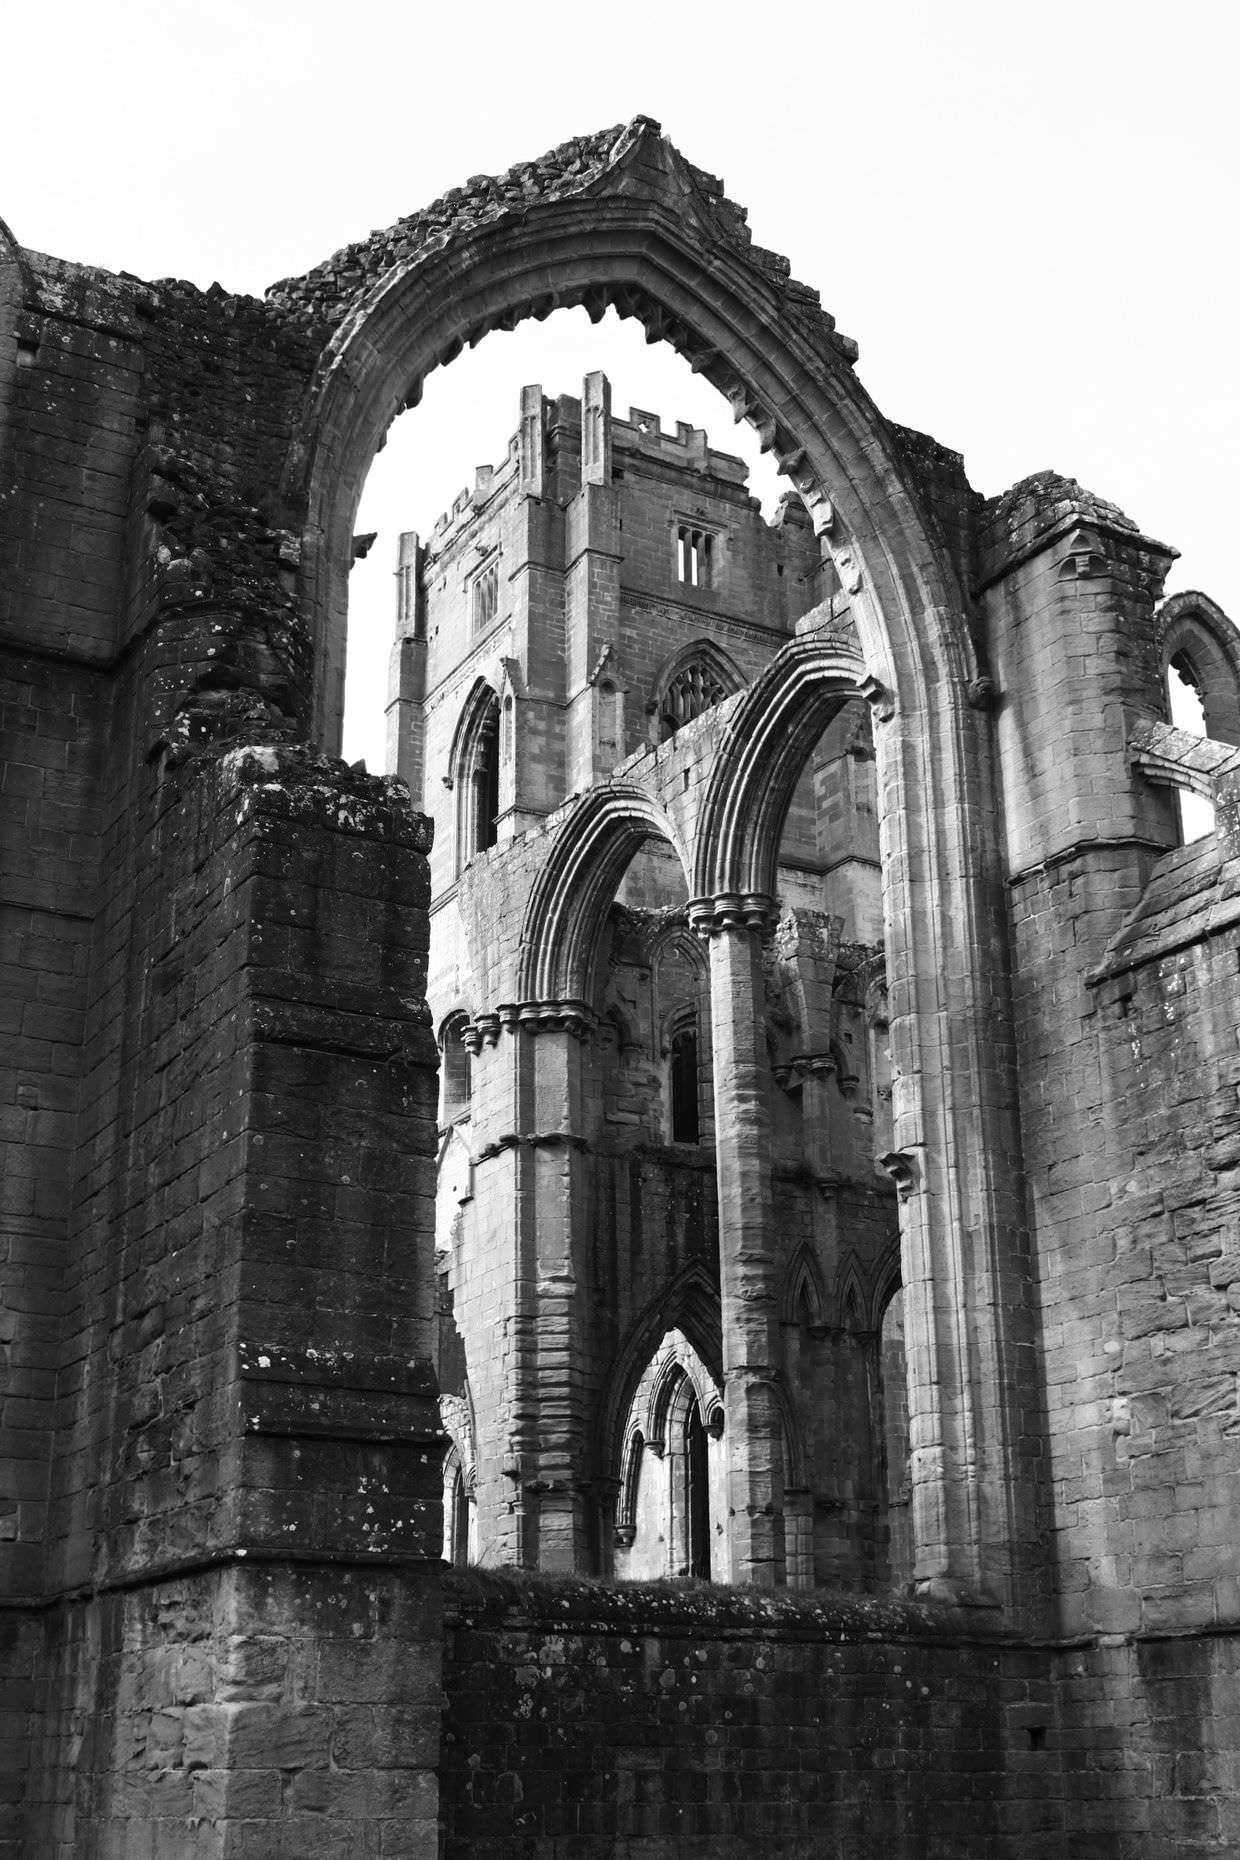 The ancient and beautiful Fountains Abbey